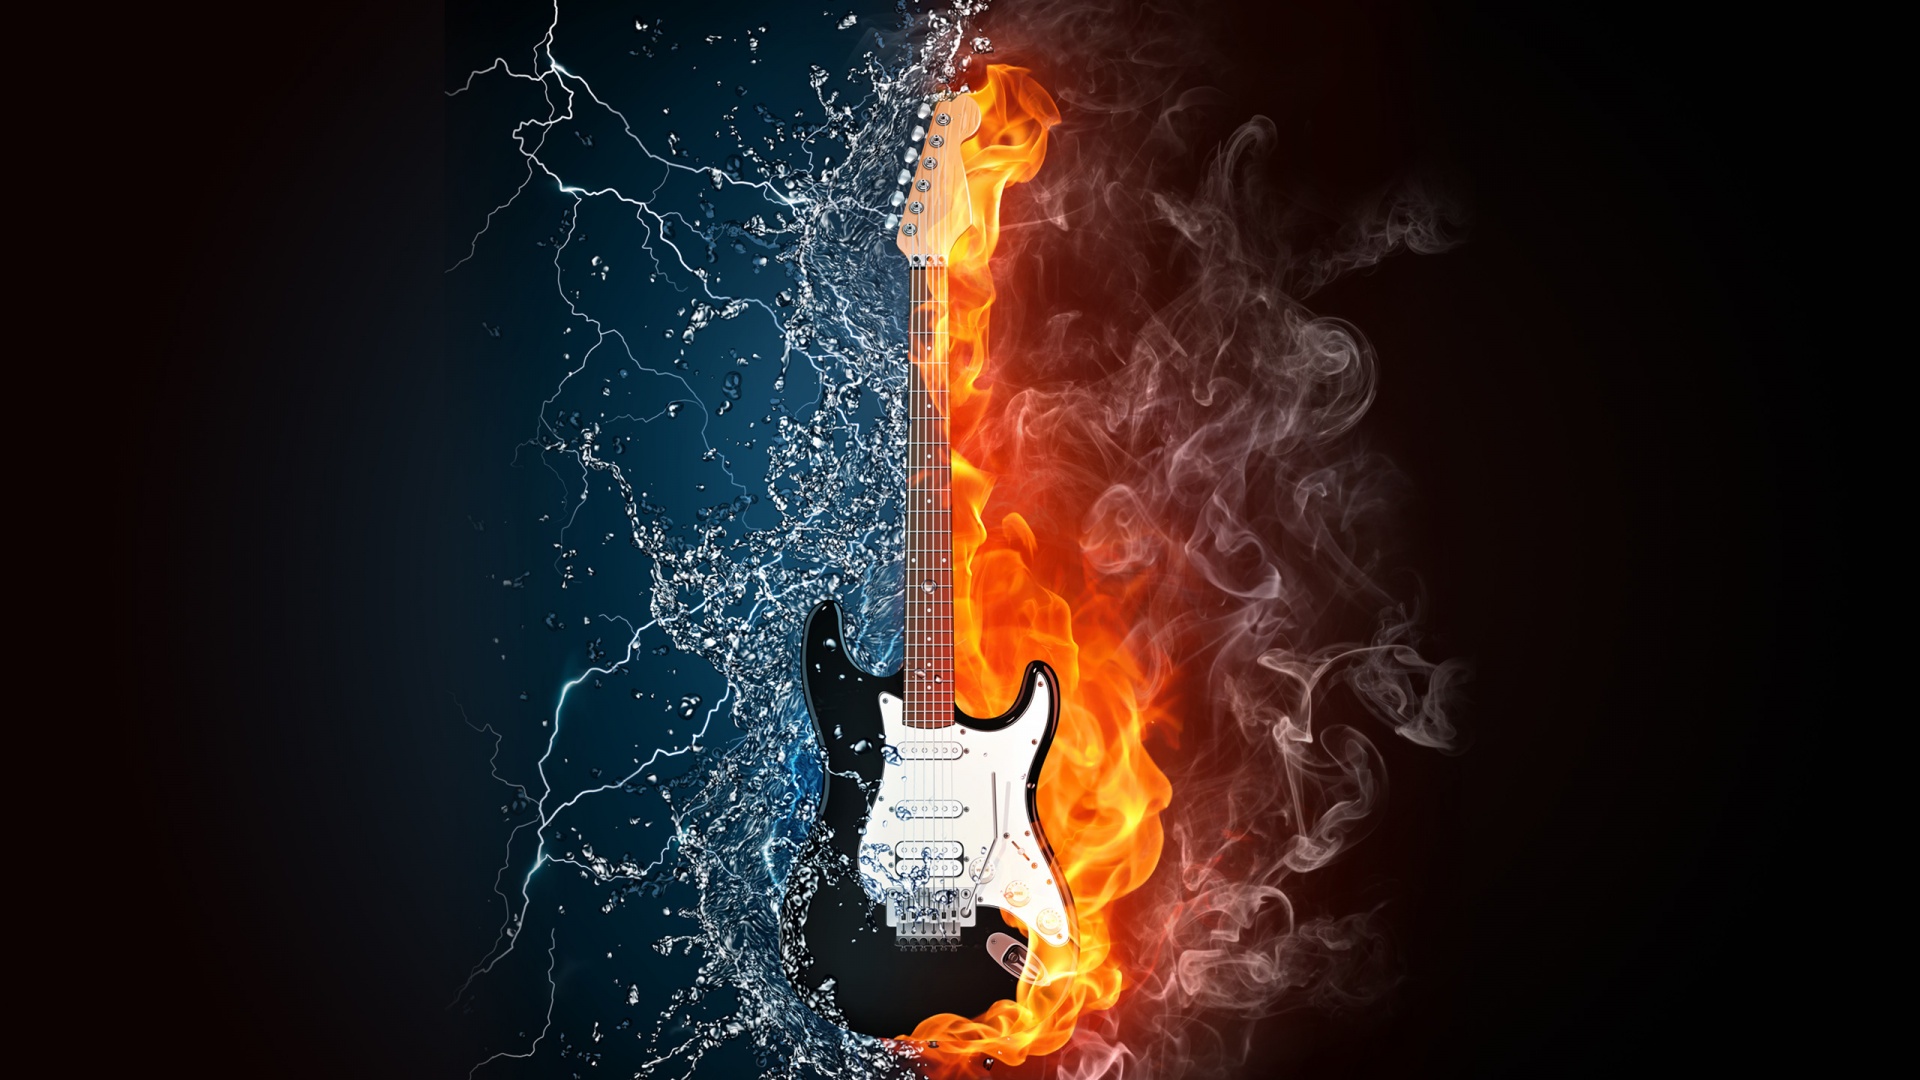 Cool Fire And Water Guitar Image HD Wallpaper